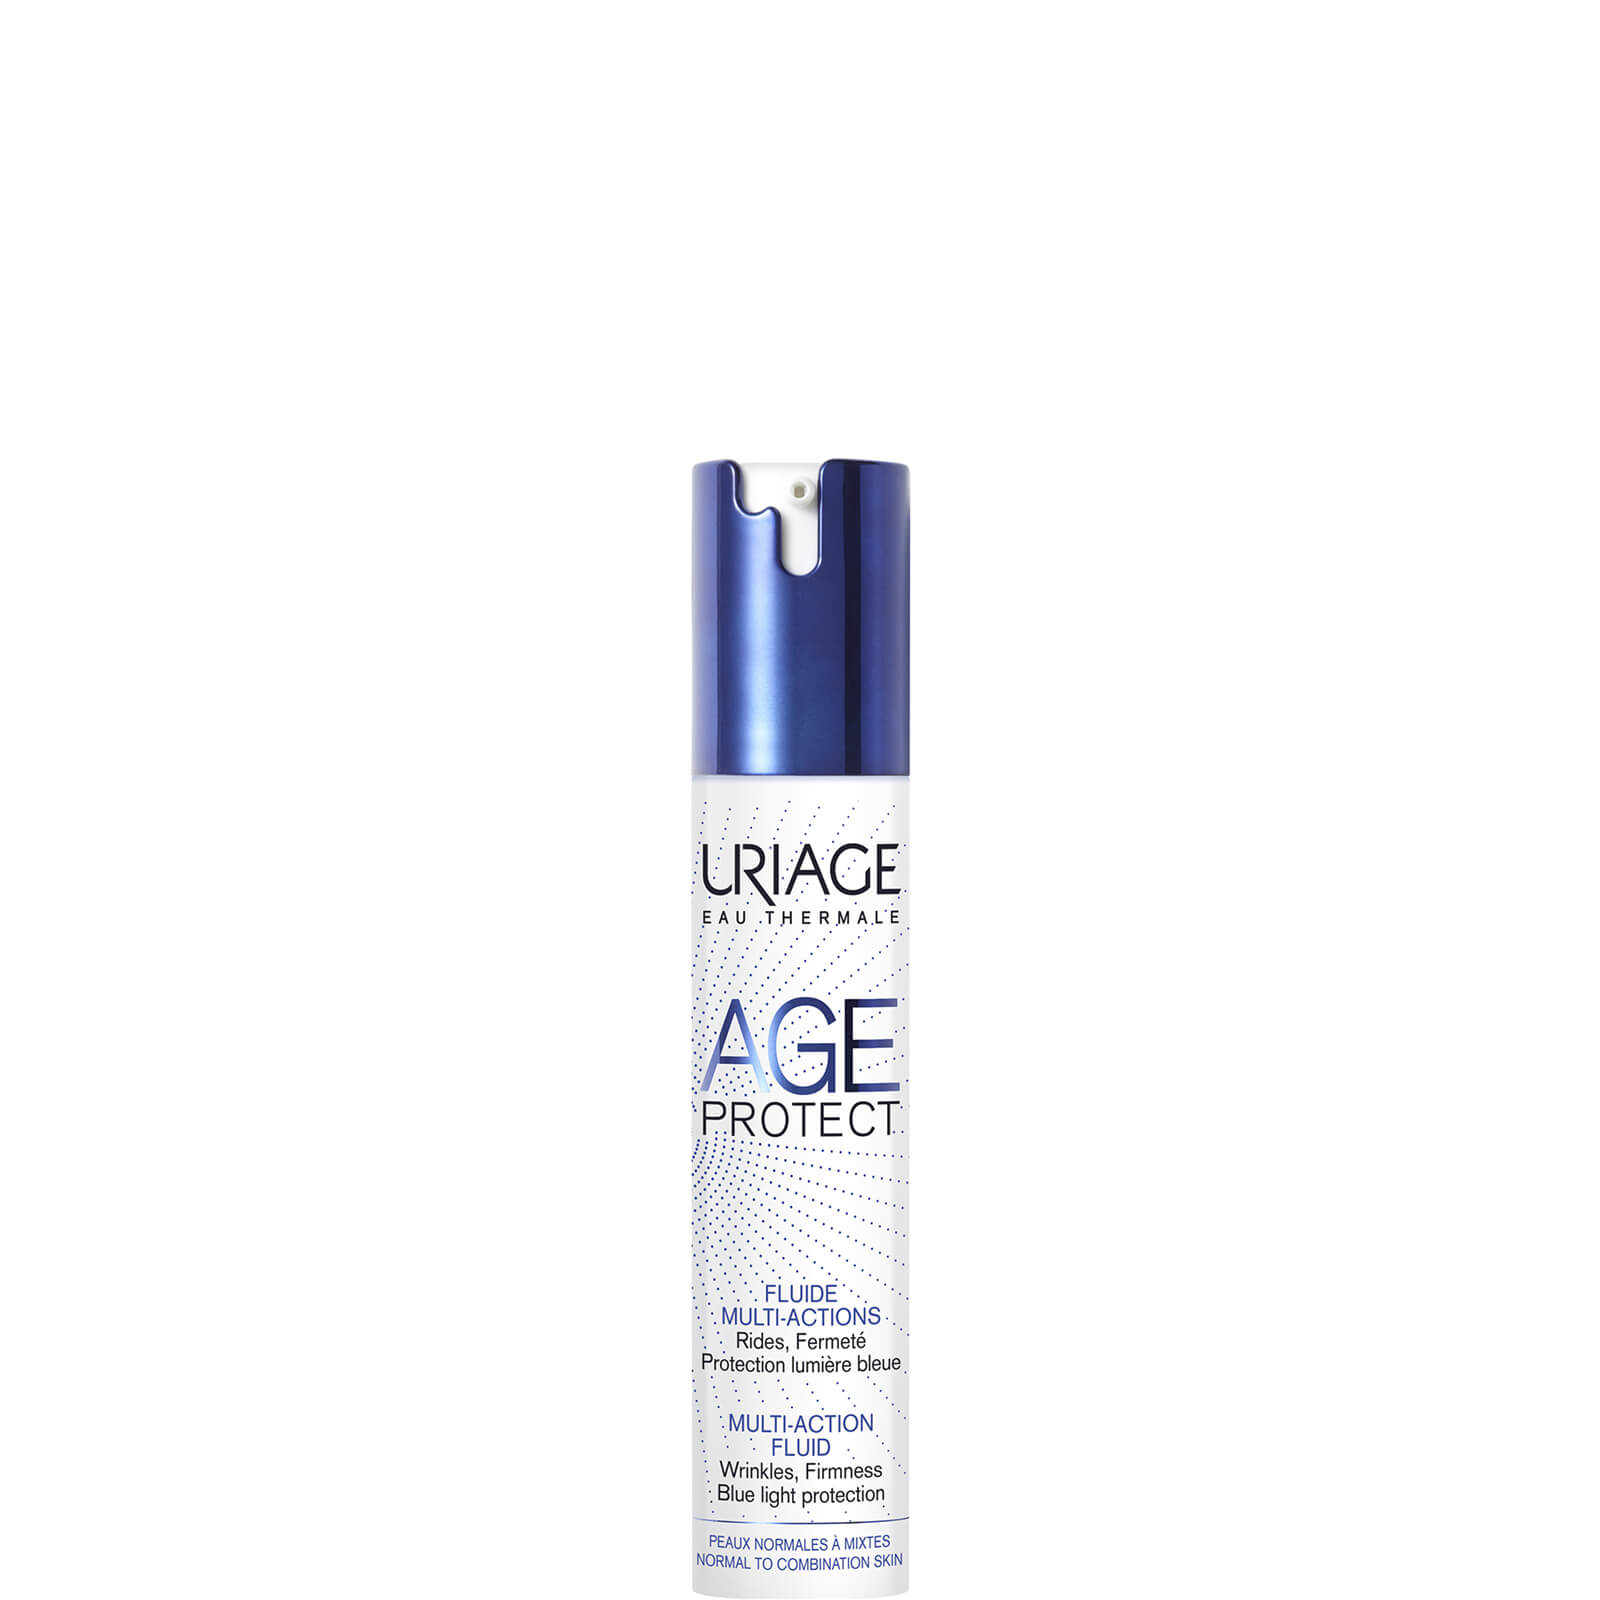 Fluido Multi-Action Age Protect Uriage 40ml